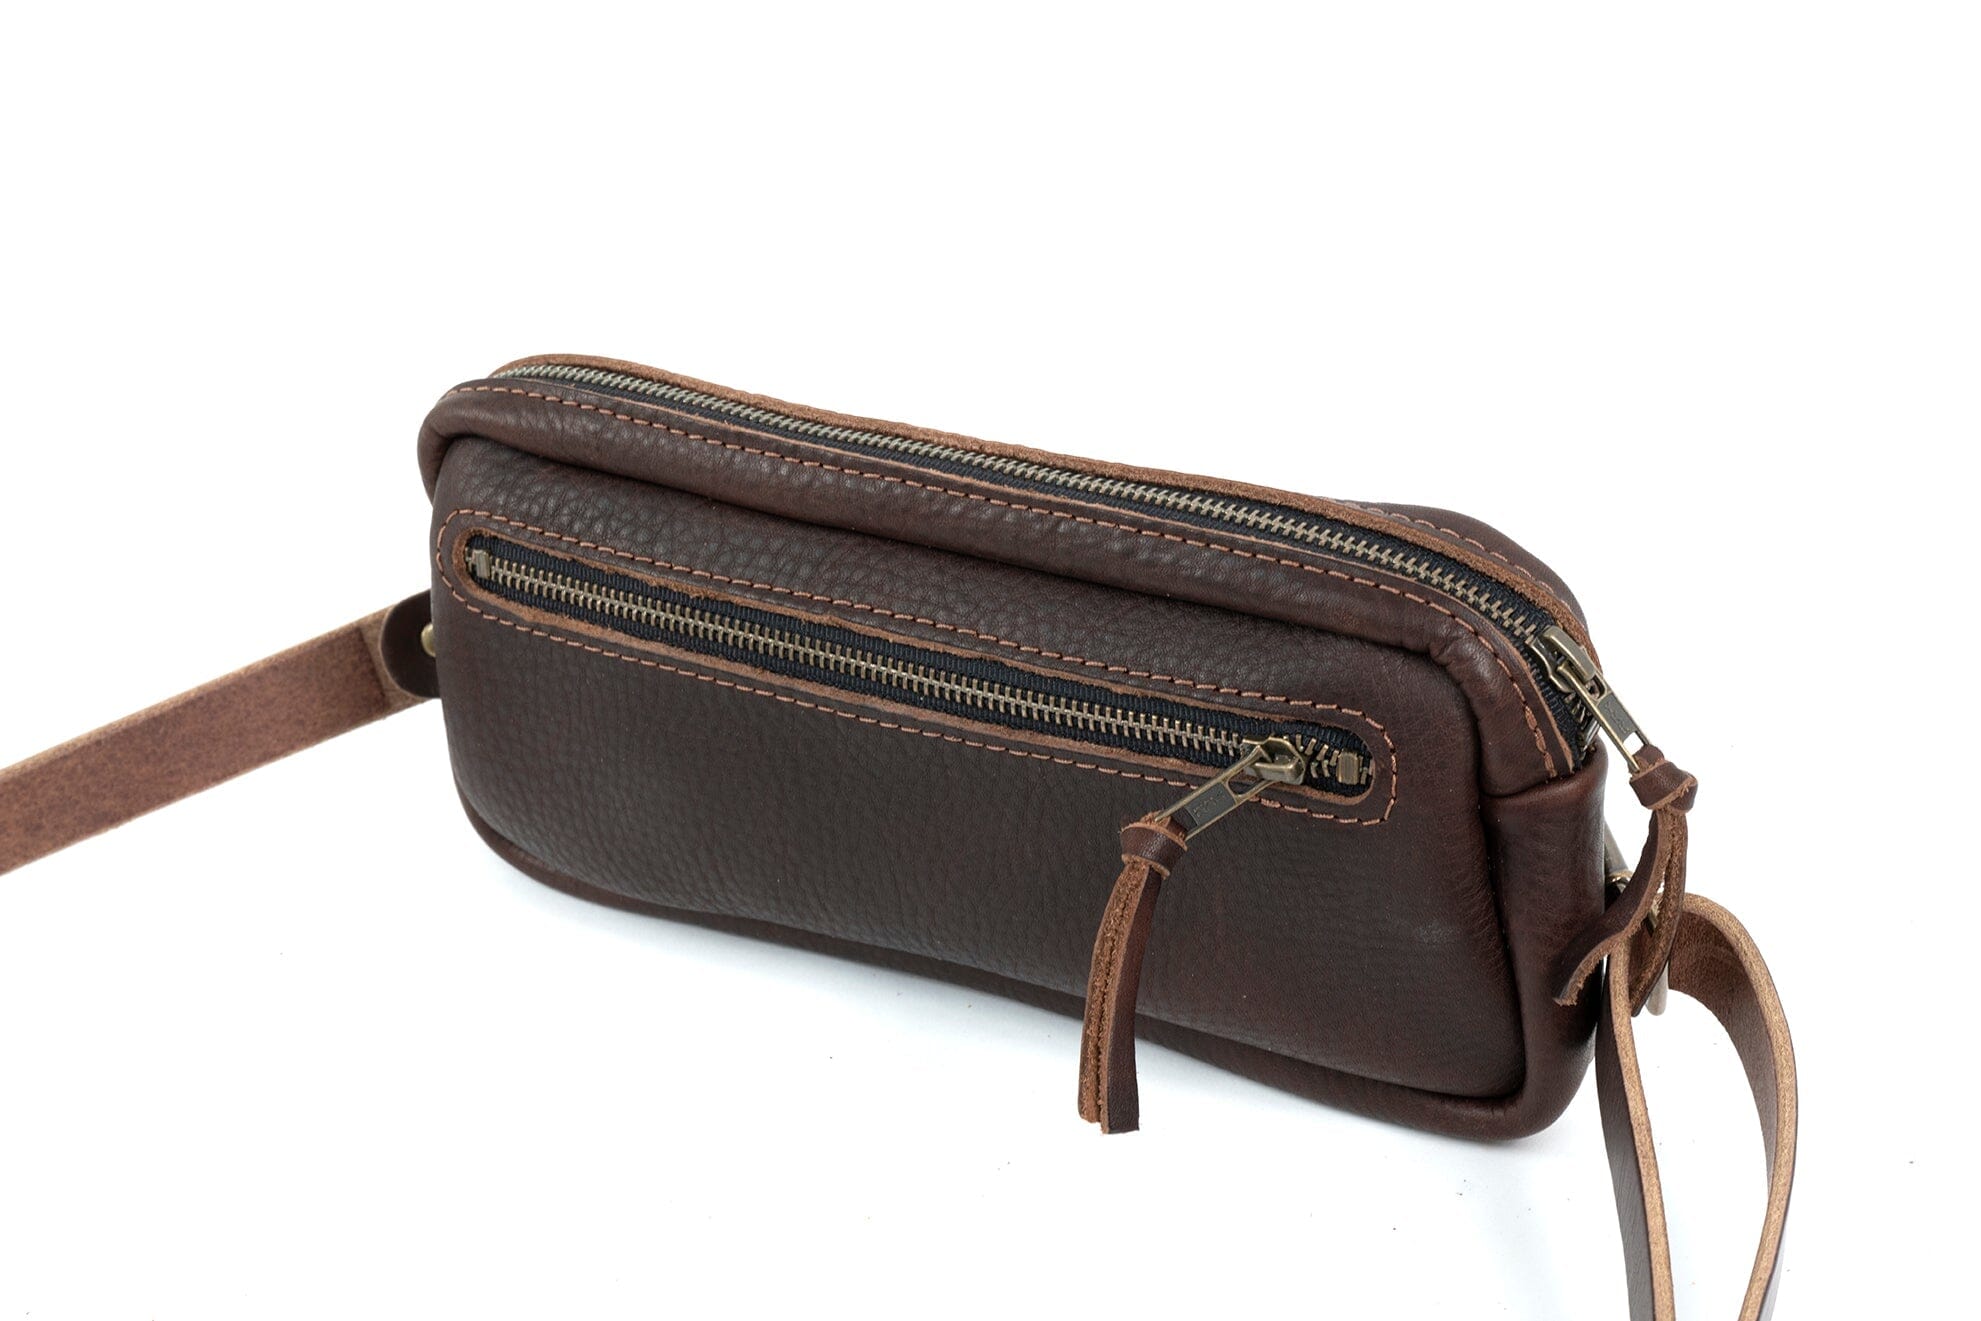 LEATHER FANNY PACK / LEATHER WAIST BAG - DELUXE (RTS)